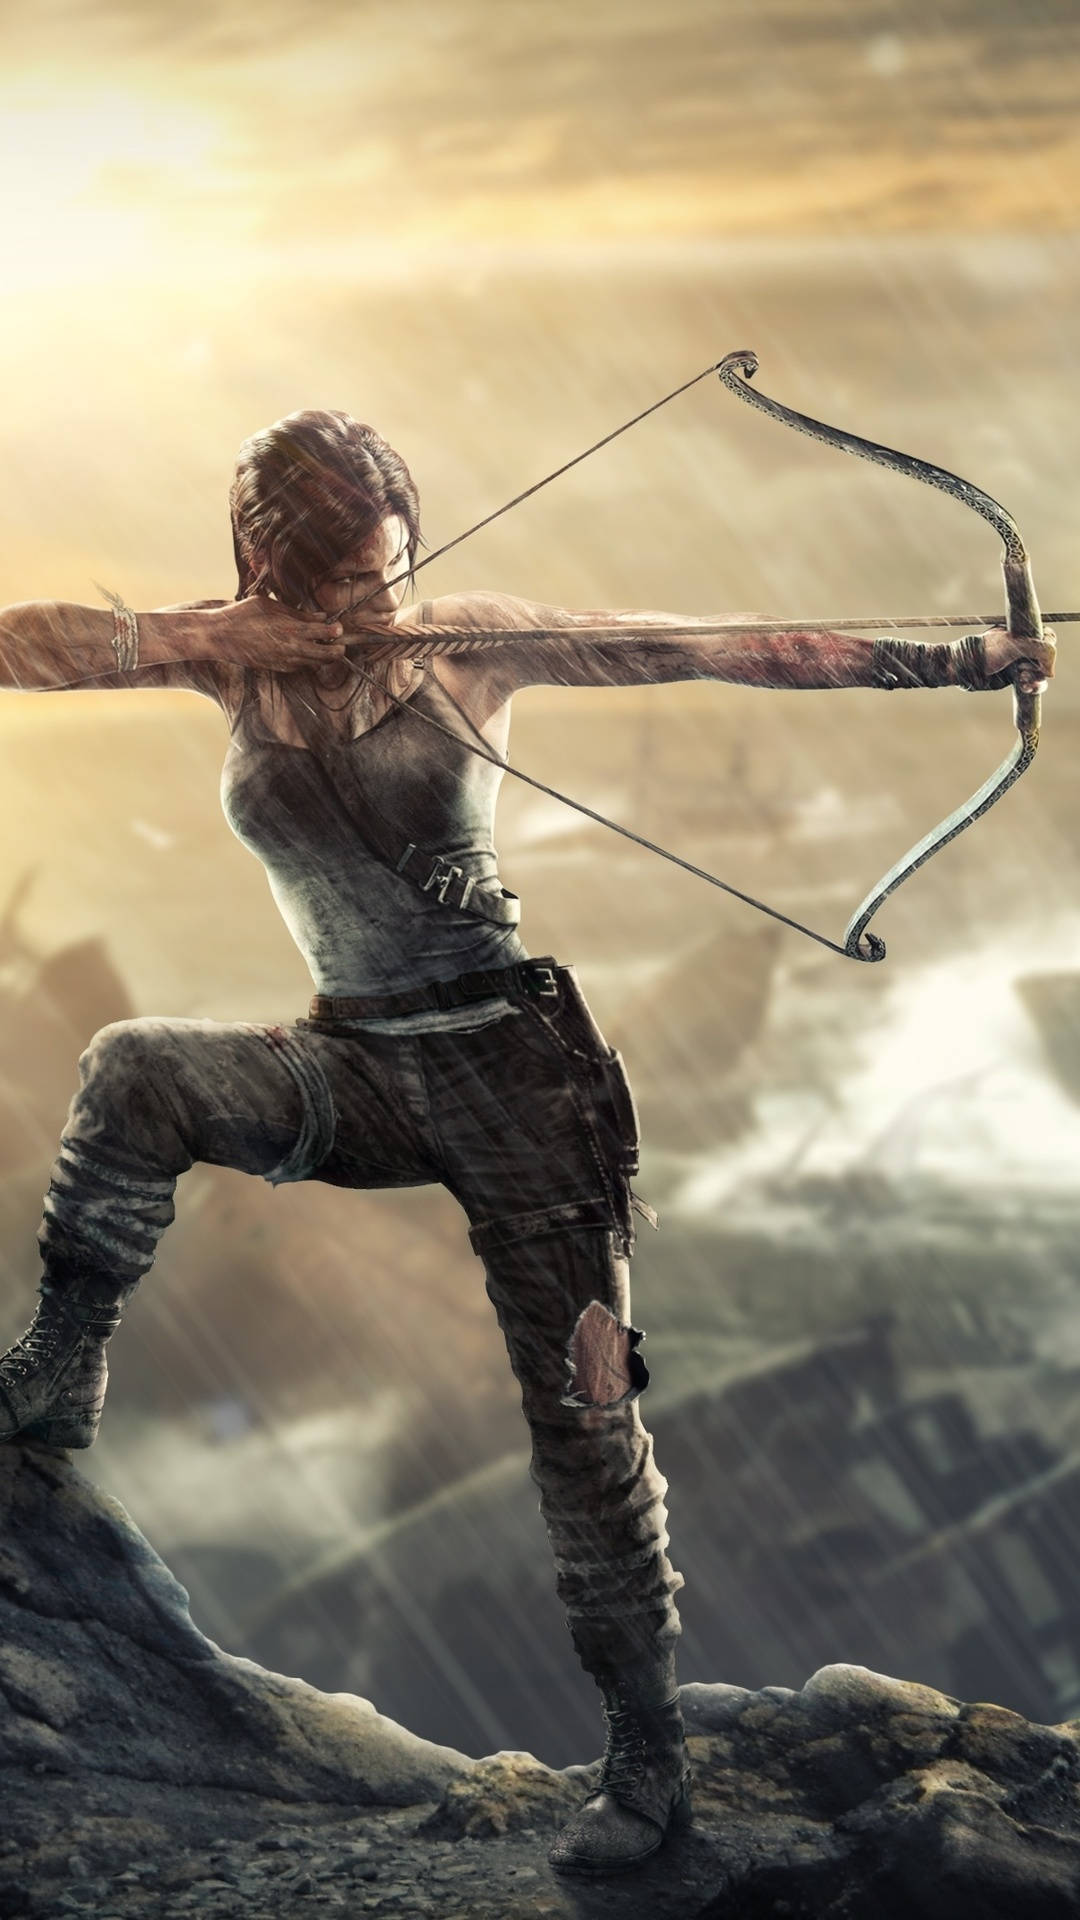 "Lara Croft powers up with her brand new iPhone. Ready for action!" Wallpaper